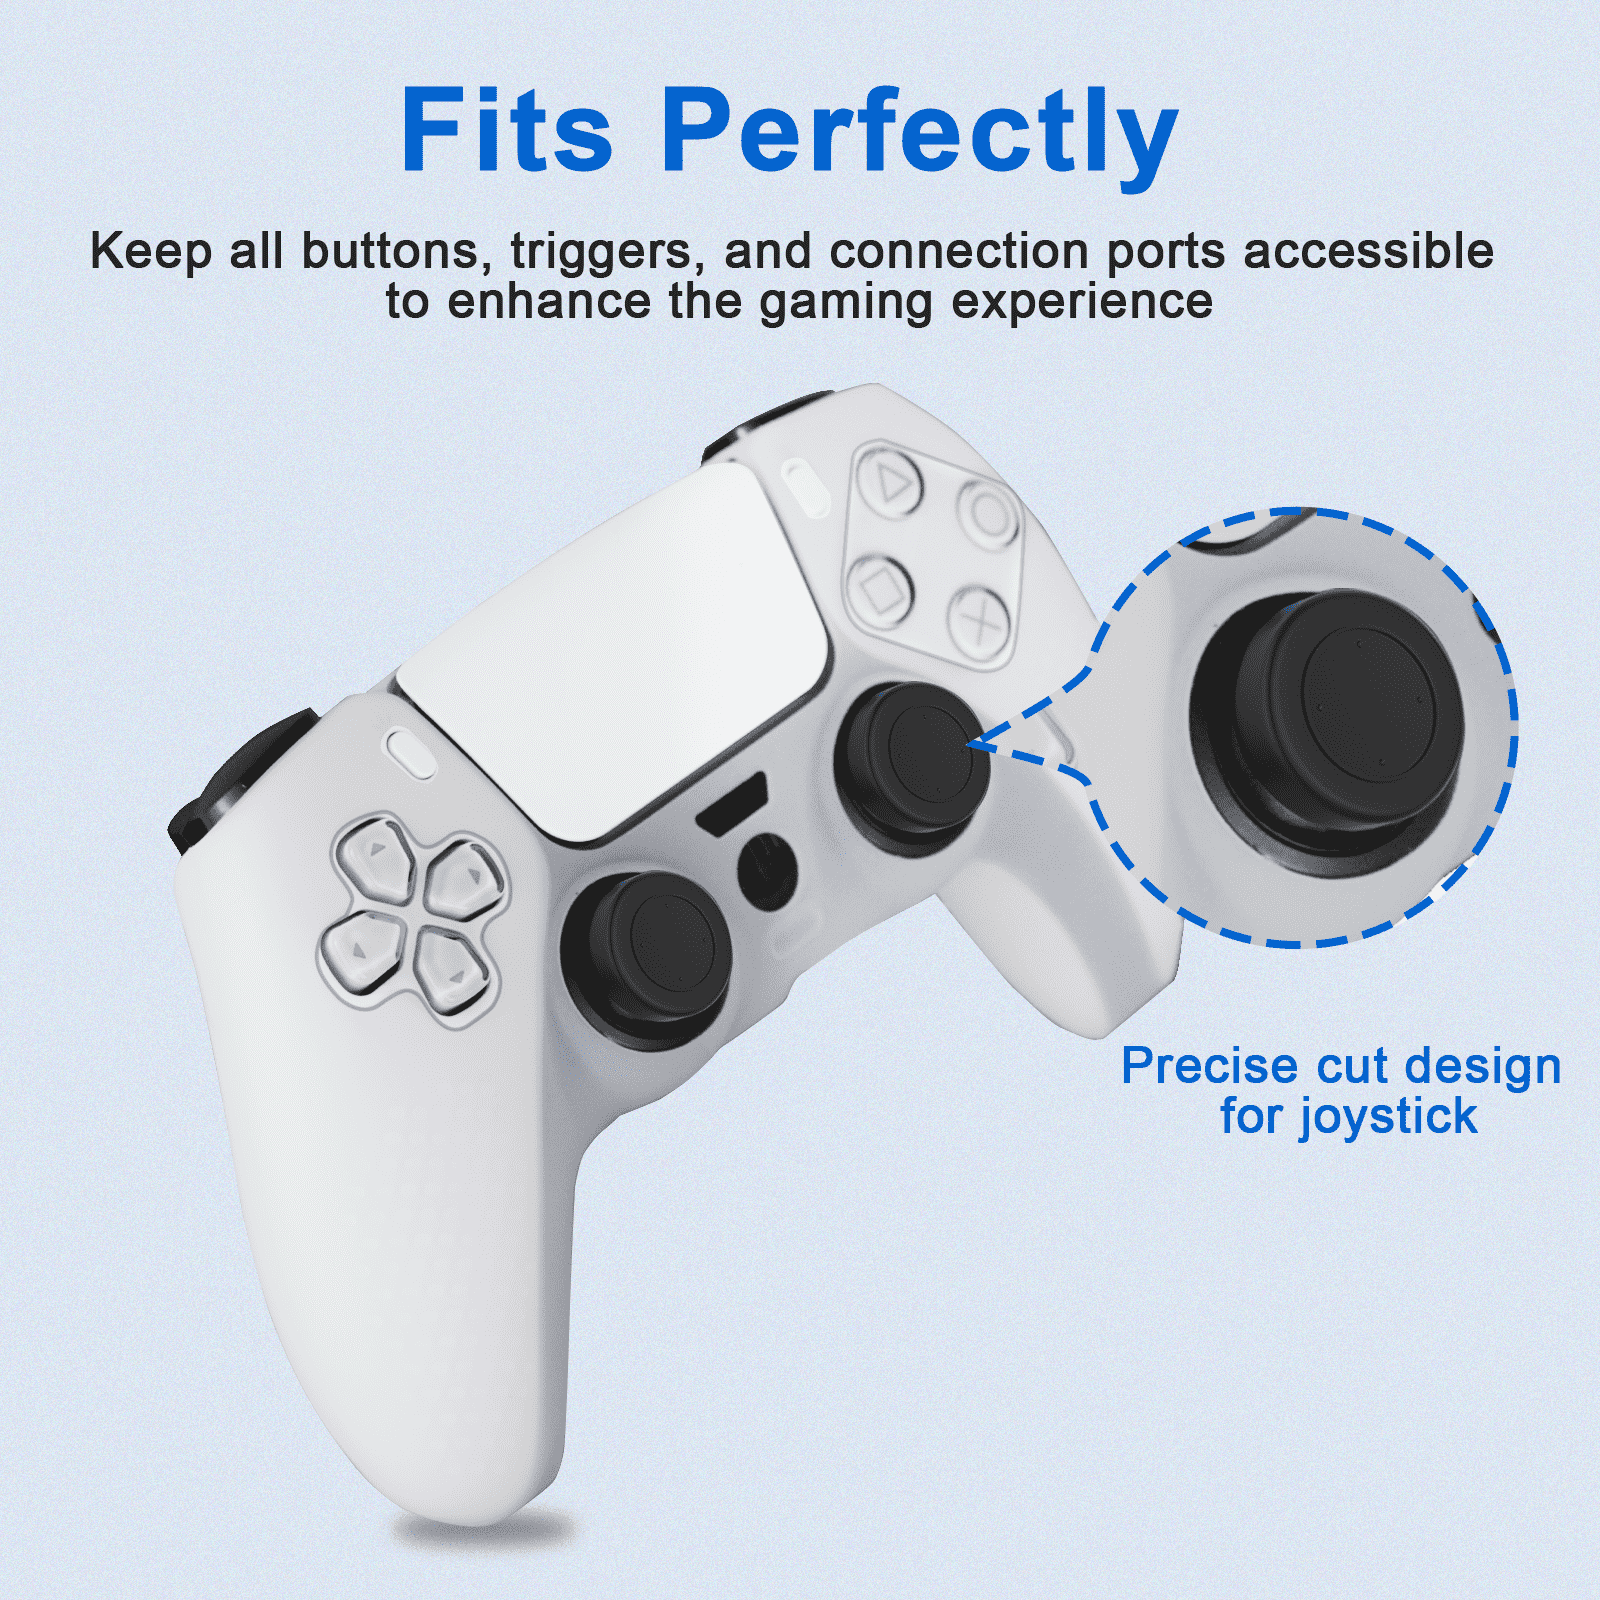 The controller case seamlessly fits the controller without affecting gameplay.